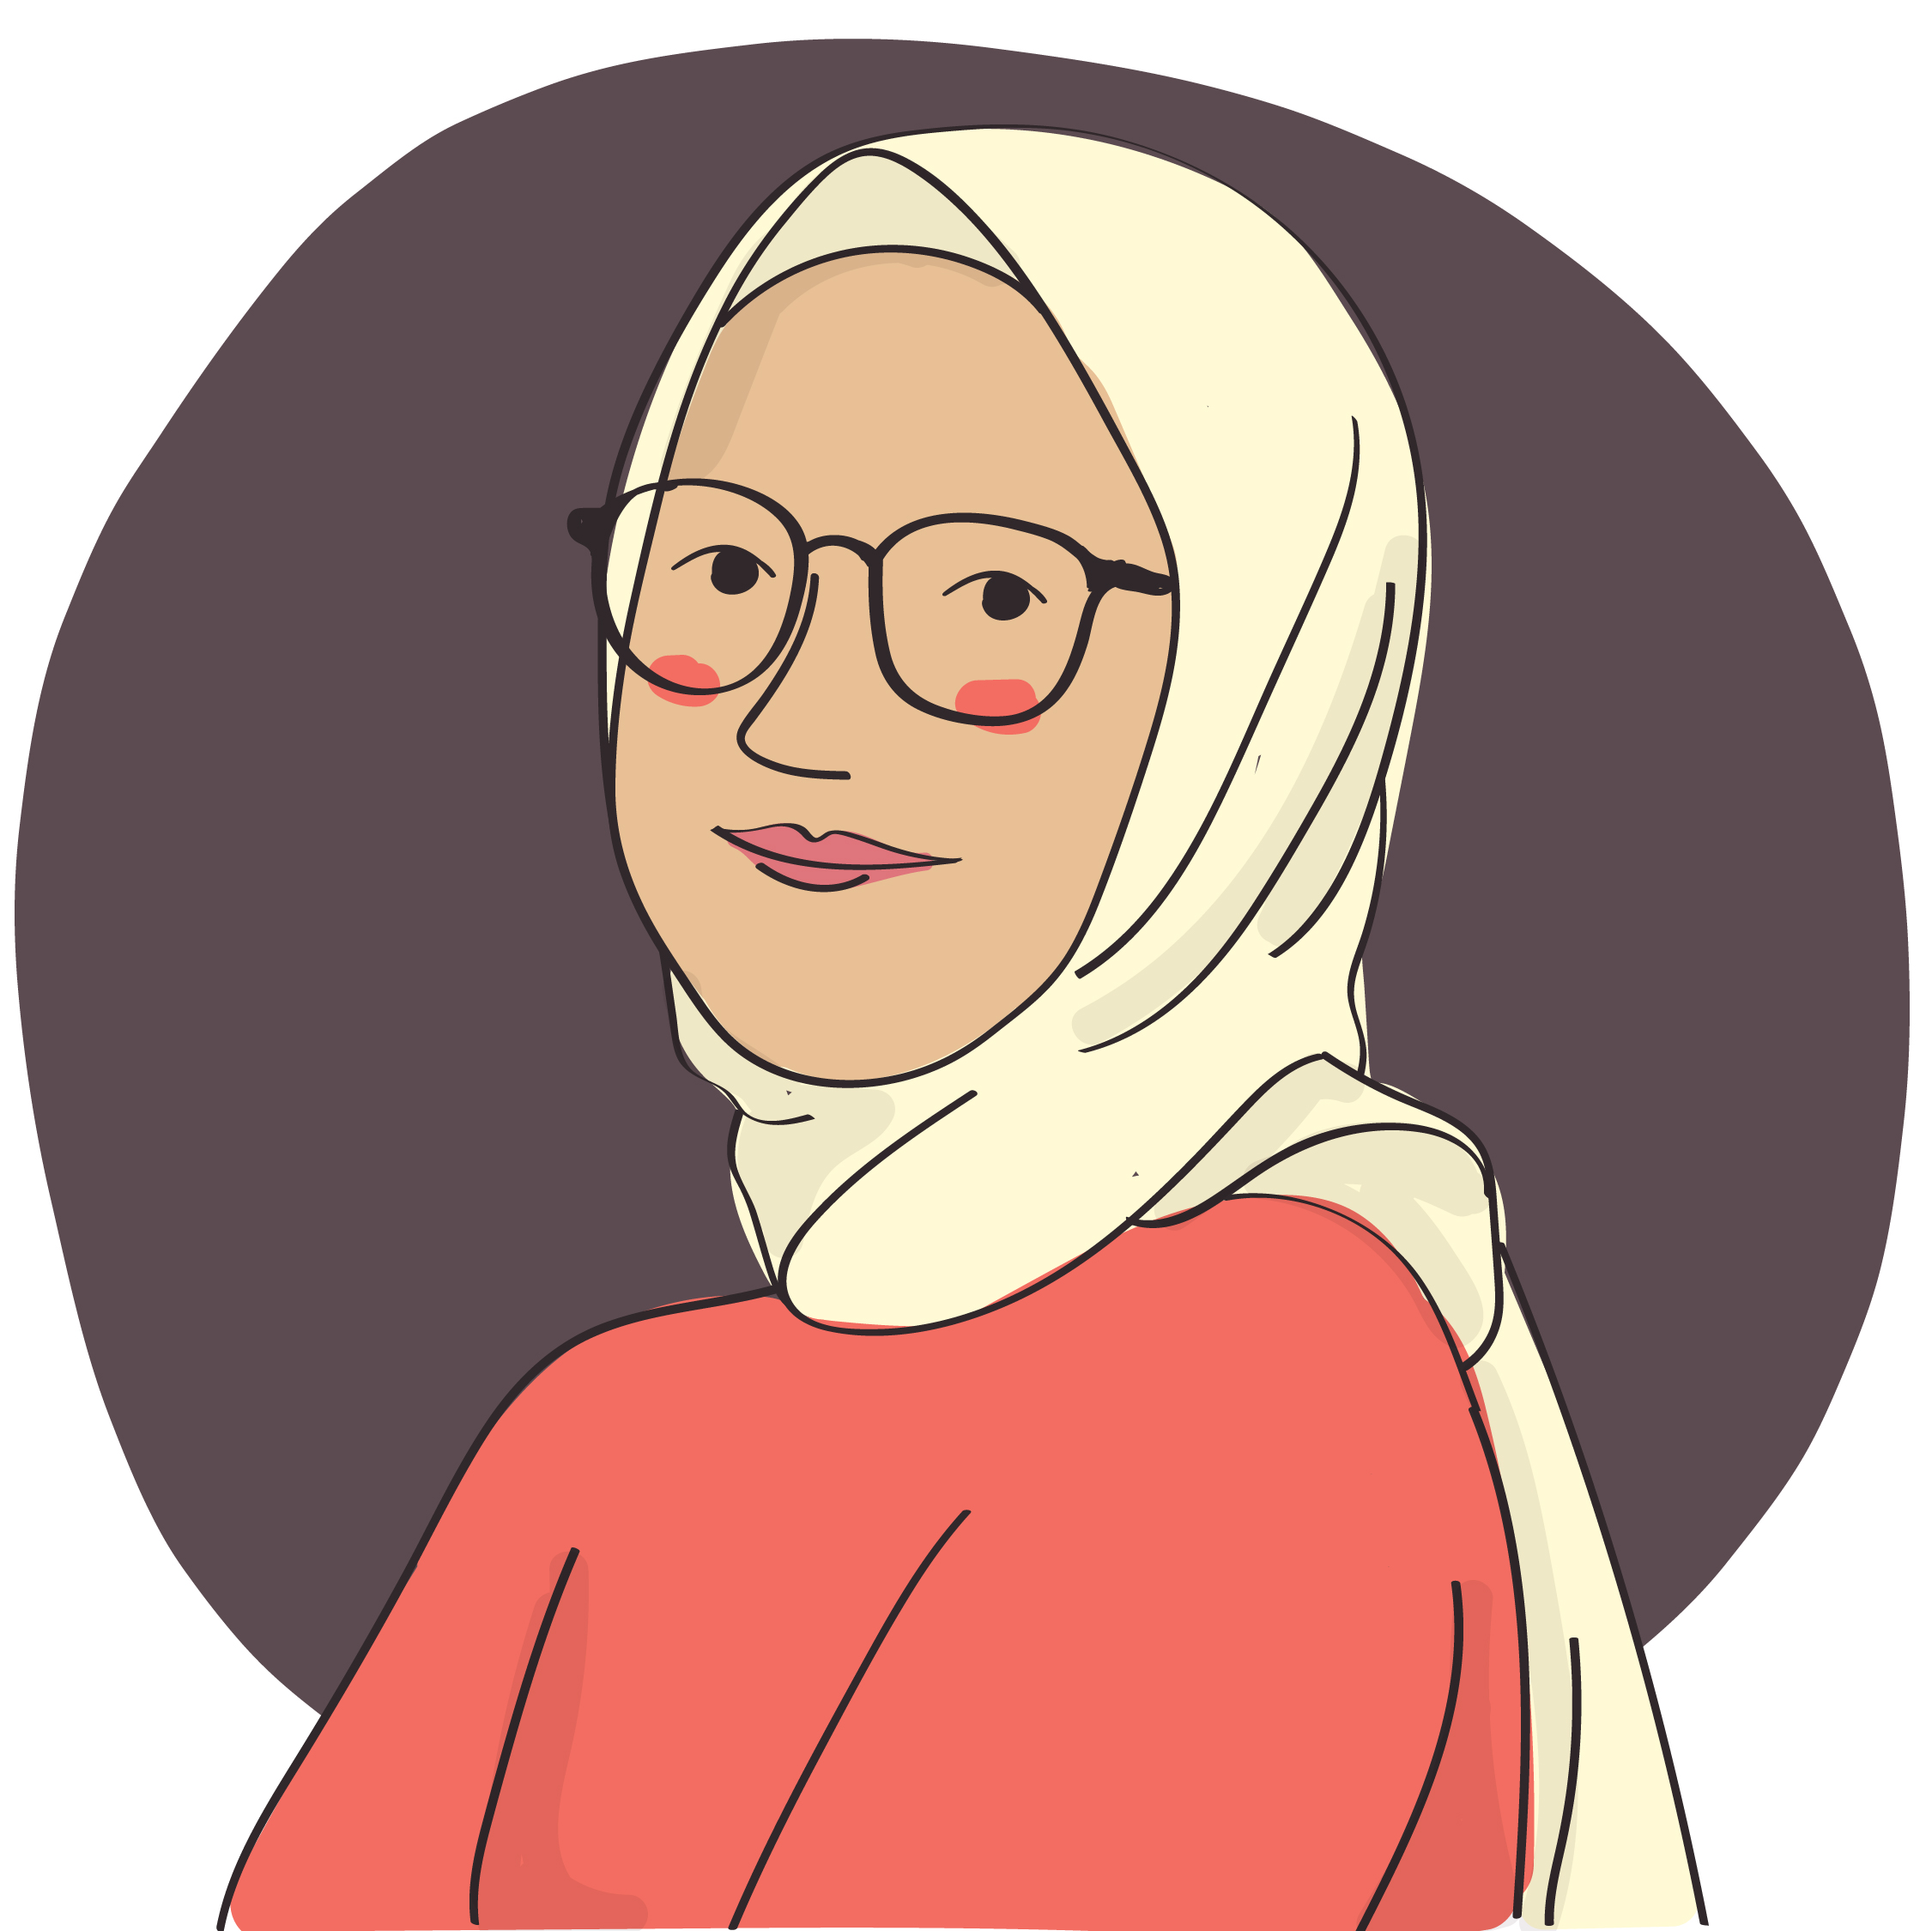 Heliana Lubis, Wellbeing Illustrator @ Recipes for Wellbeing